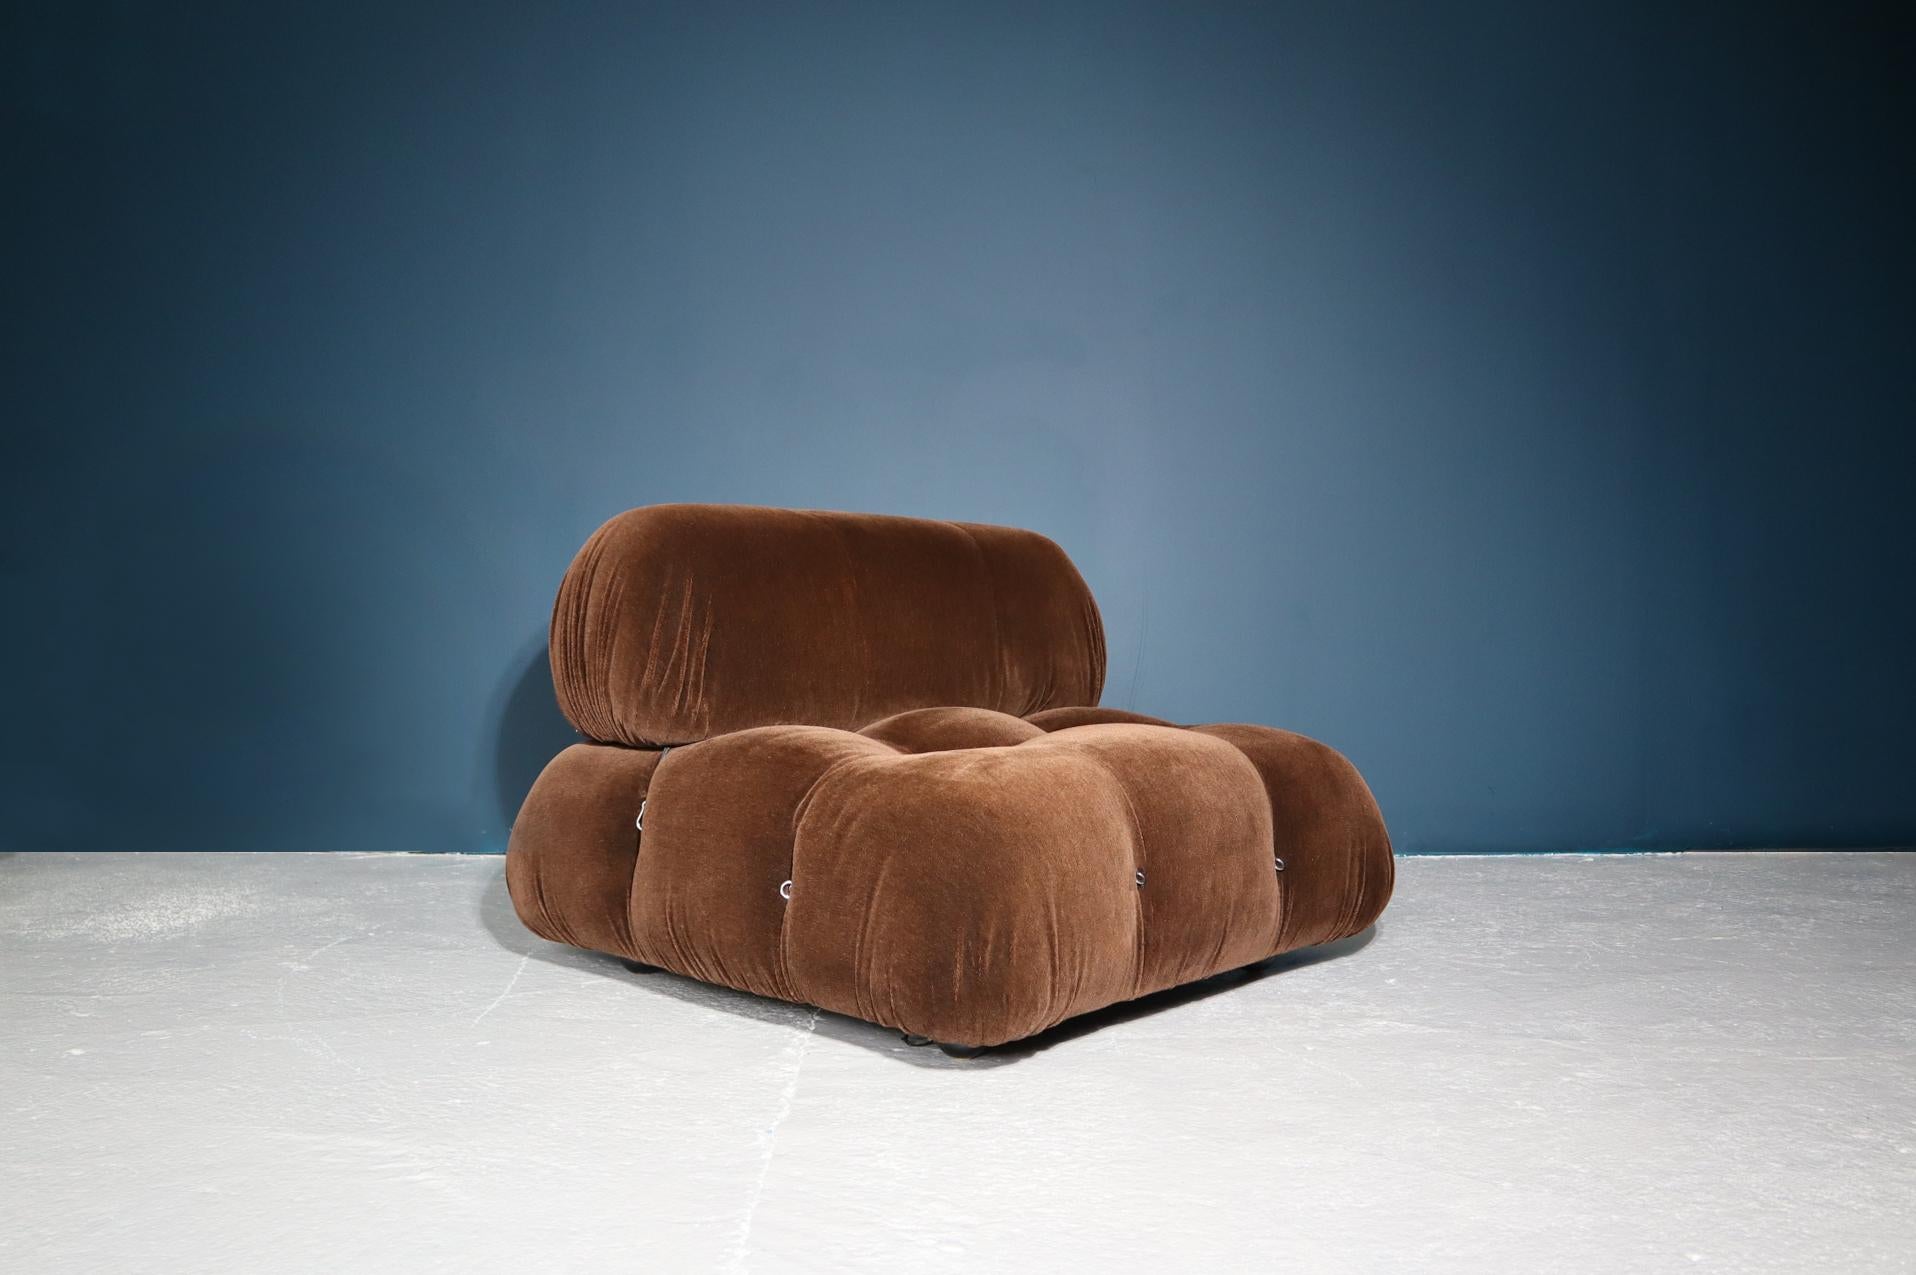 A single element Mario Bellini 'Camaleonda' chair in Brown Mohair, C&B Italia, 1970s

The design became famous almost immediately after it was featured in the exhibition 